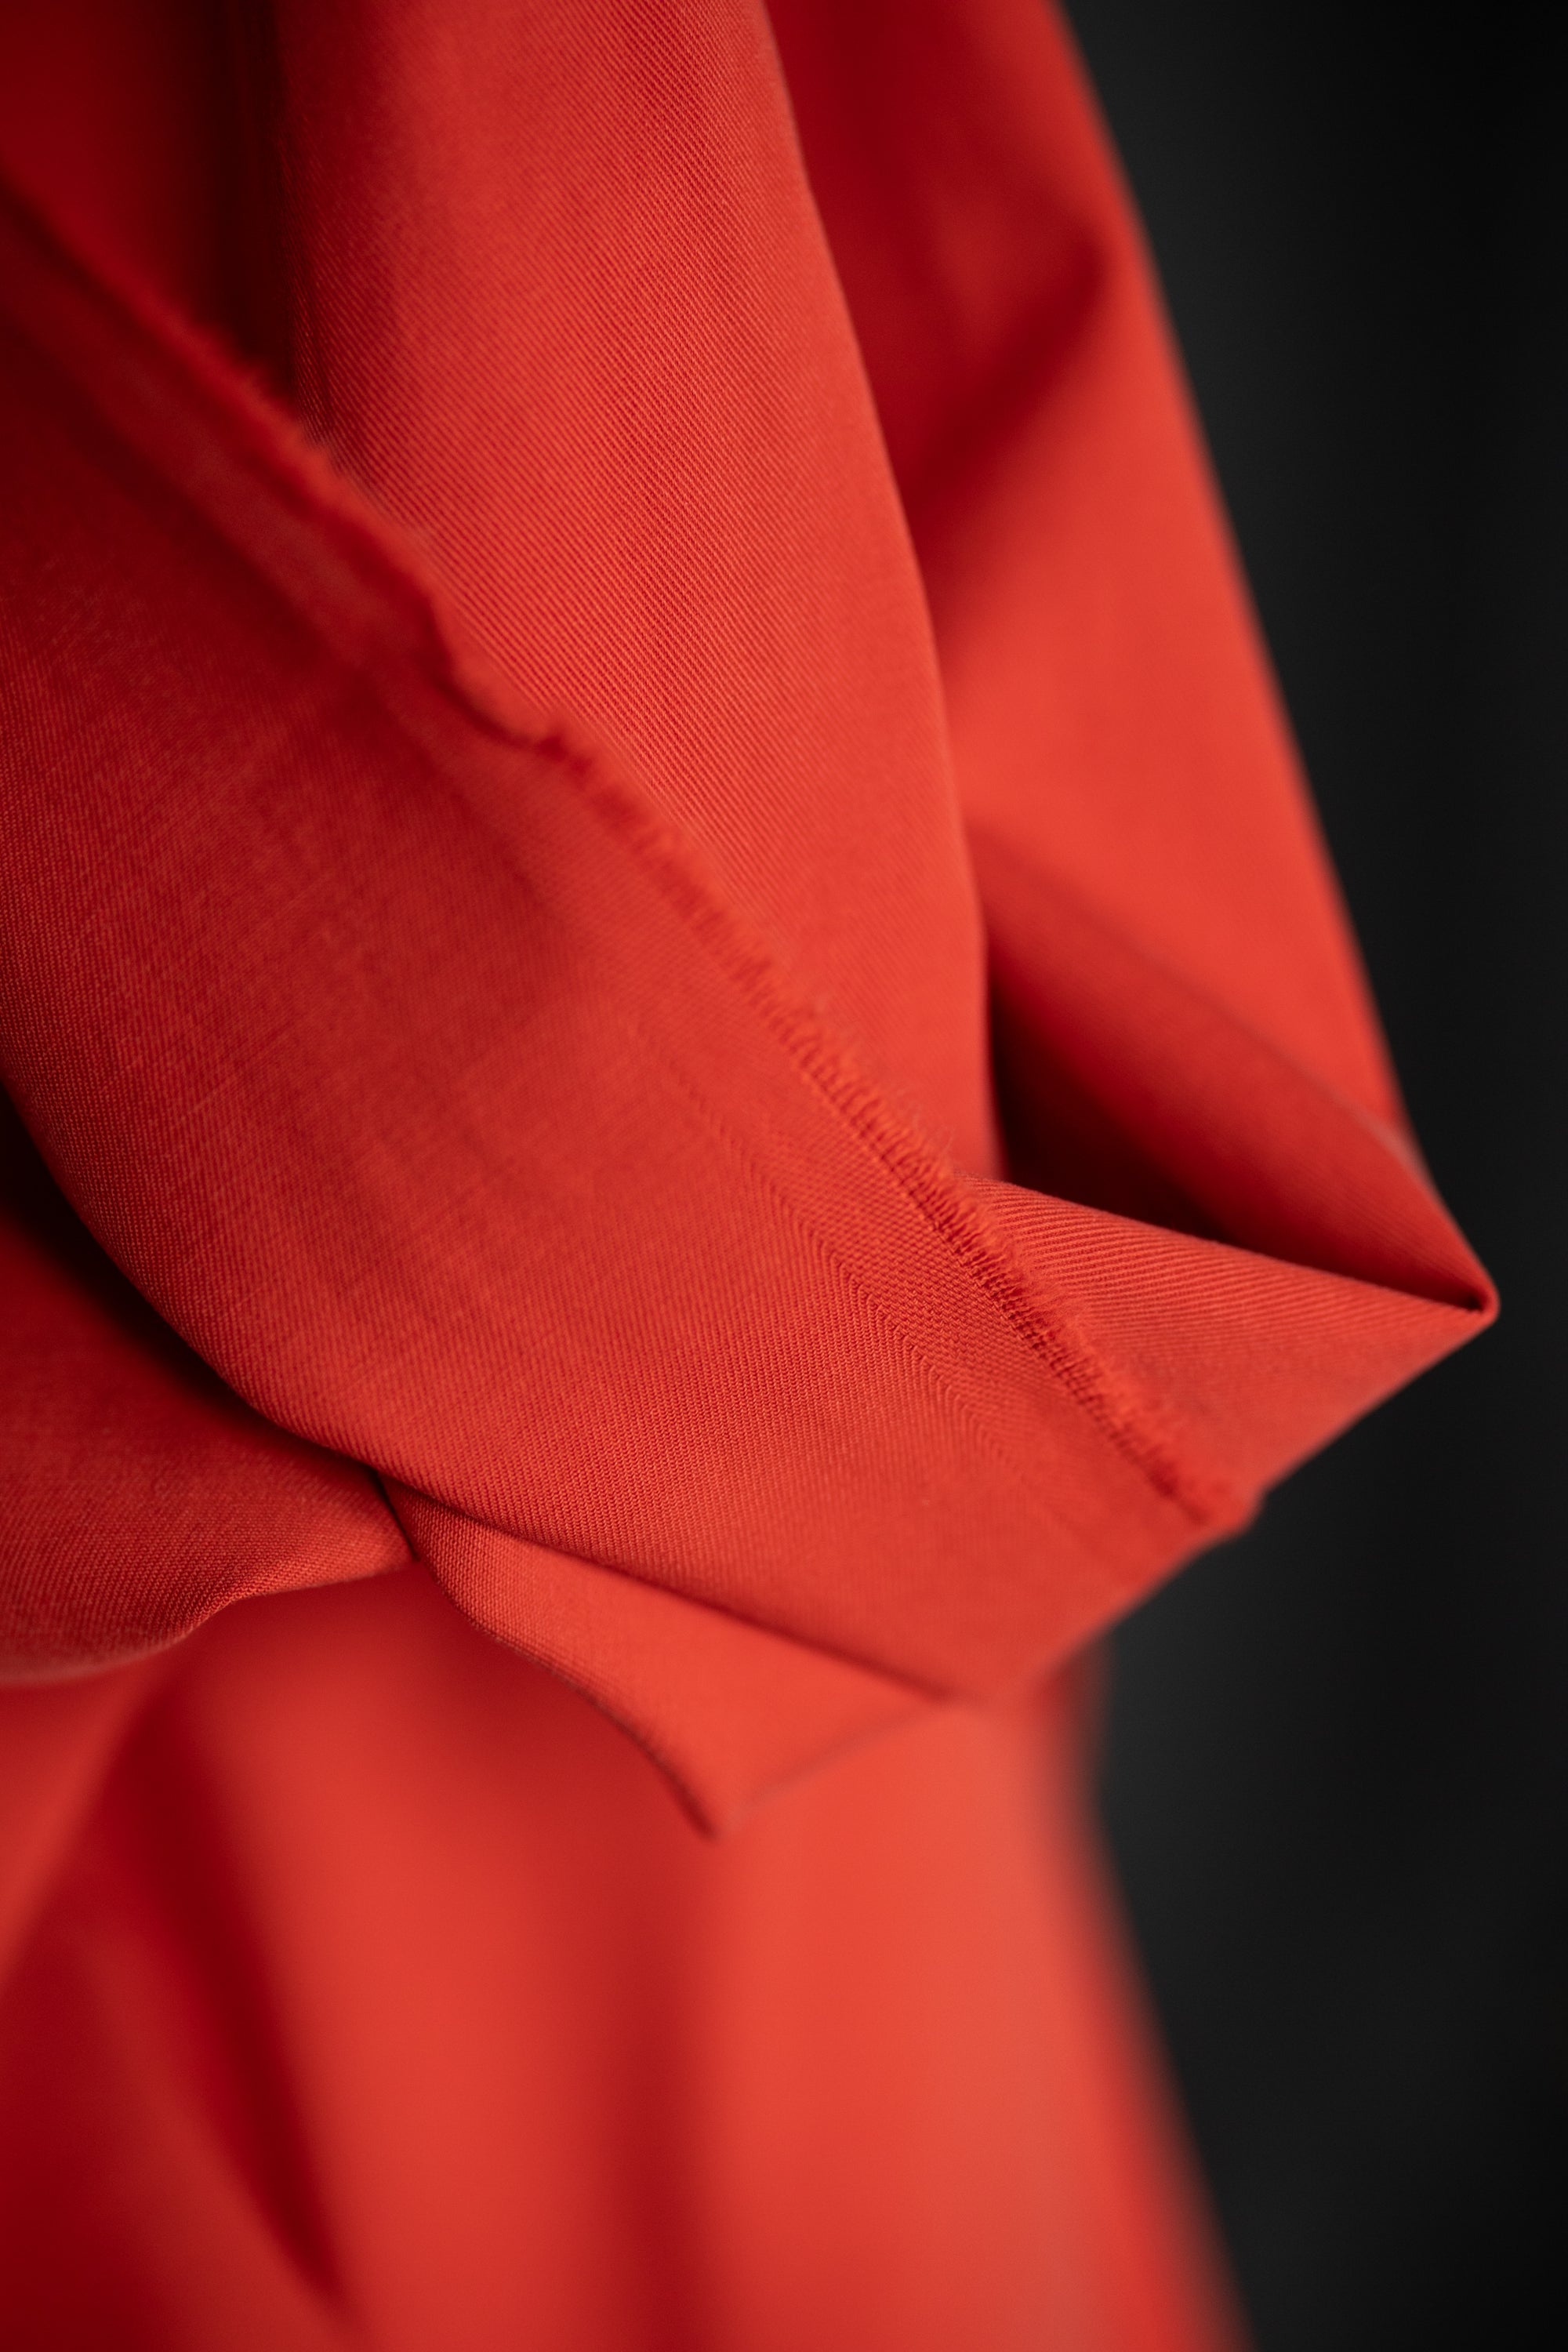 Sanded twill fabric in a bright red orange color